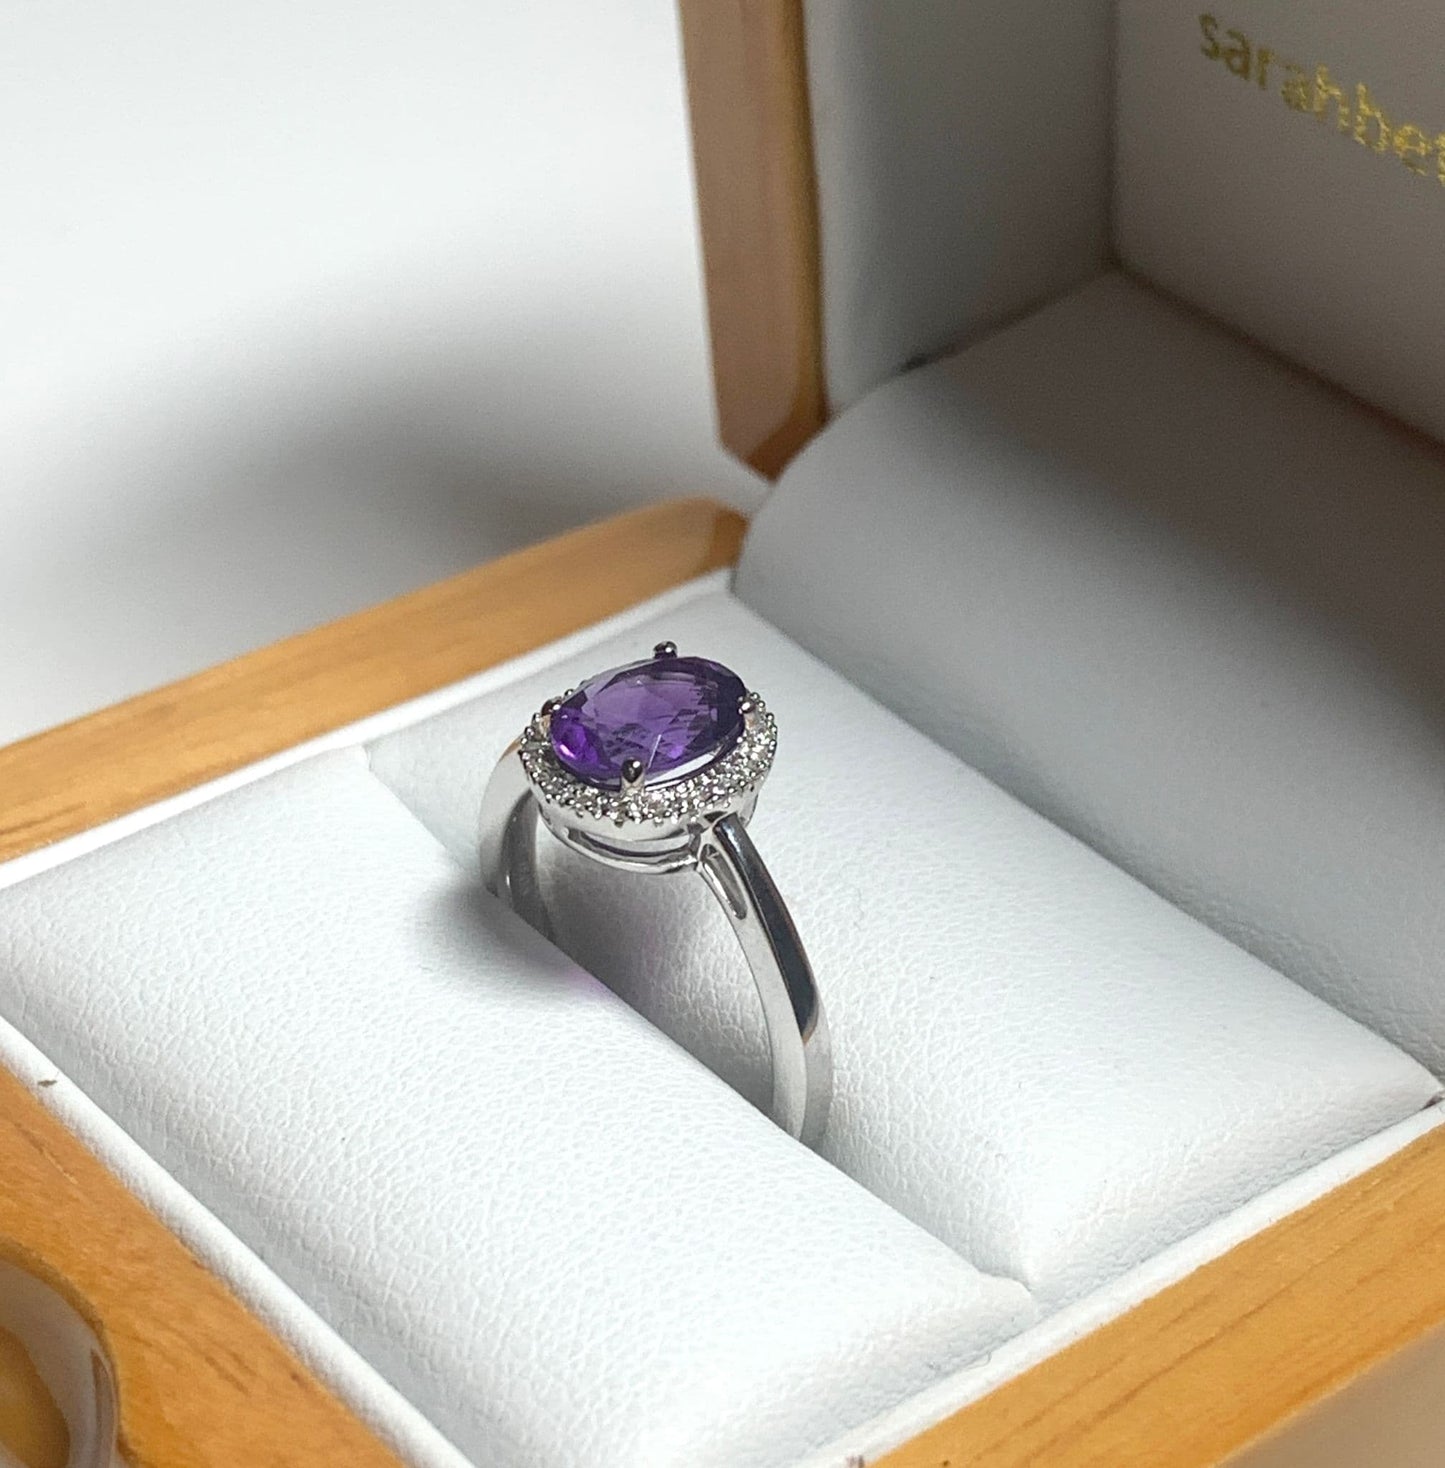 Oval cut amethyst and diamond white gold cluster ring